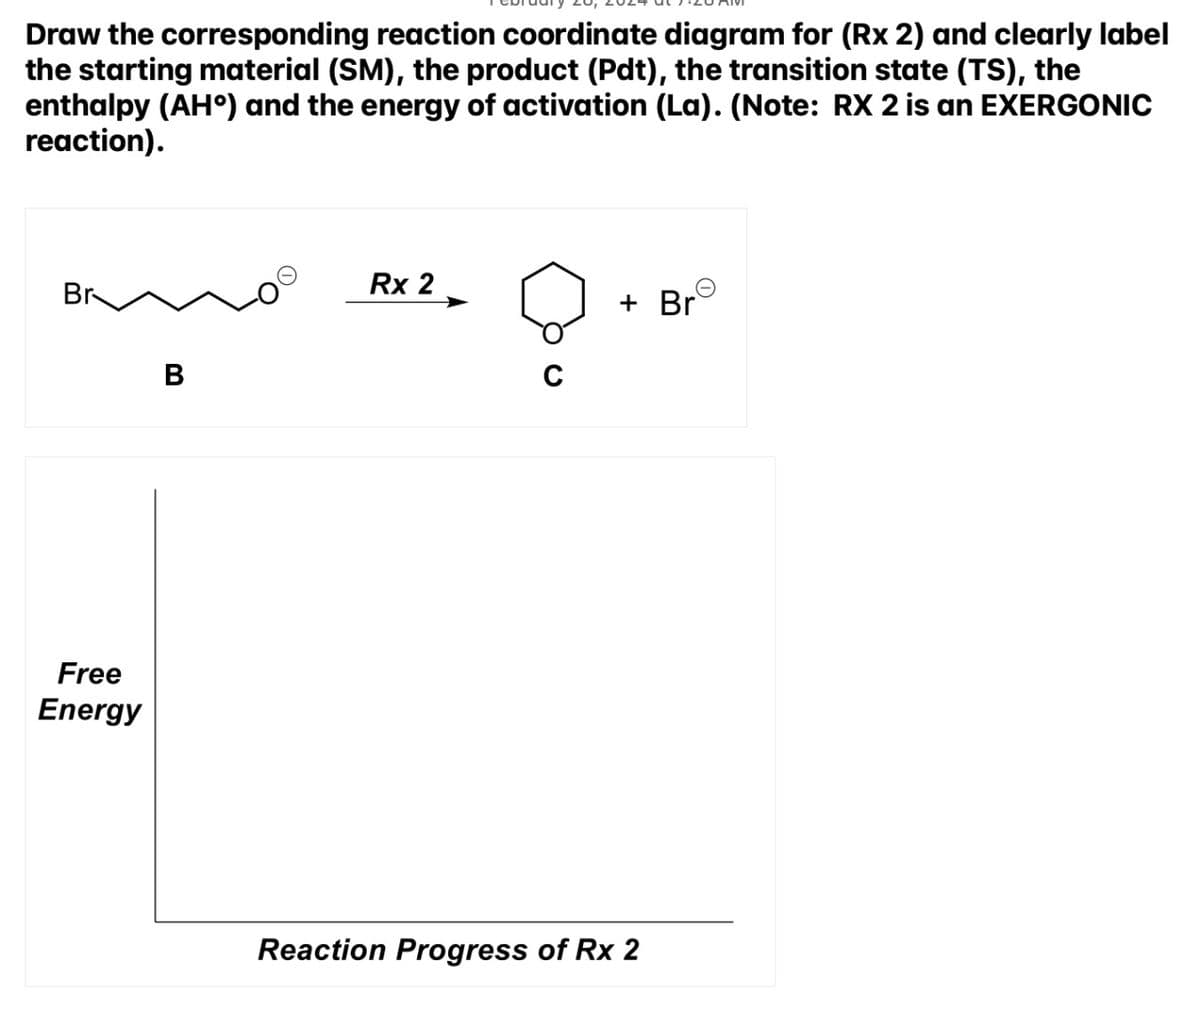 Draw the corresponding reaction coordinate diagram for (Rx 2) and clearly label
the starting material (SM), the product (Pdt), the transition state (TS), the
enthalpy (AHº) and the energy of activation (La). (Note: RX 2 is an EXERGONIC
reaction).
Br
Free
Energy
B
Rx 2
Q
+ Br
Reaction Progress of Rx 2